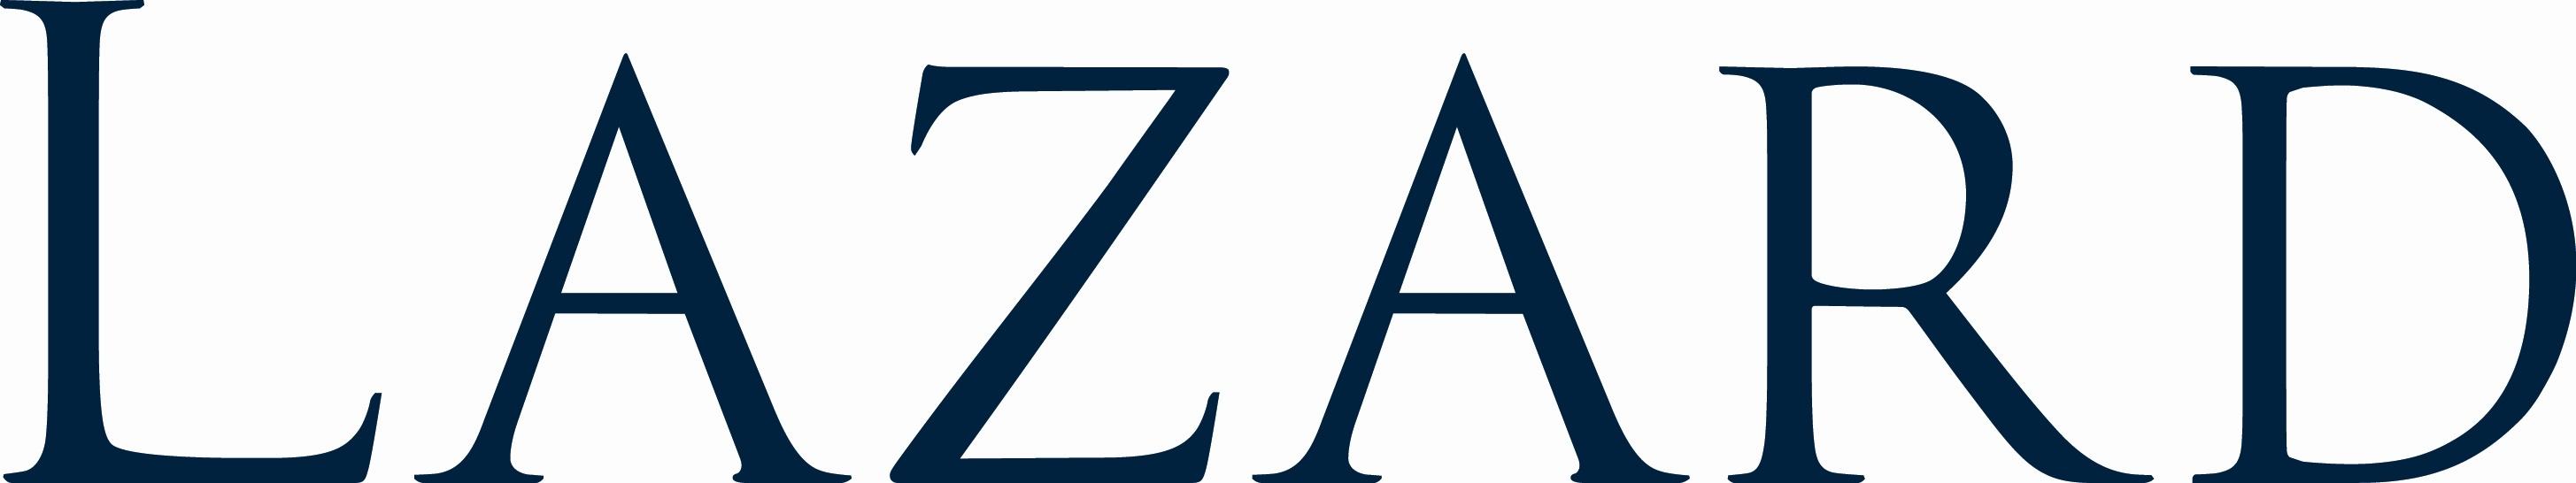 Lazard This MidCap Stock Is Priced For A Recession (NYSELAZ